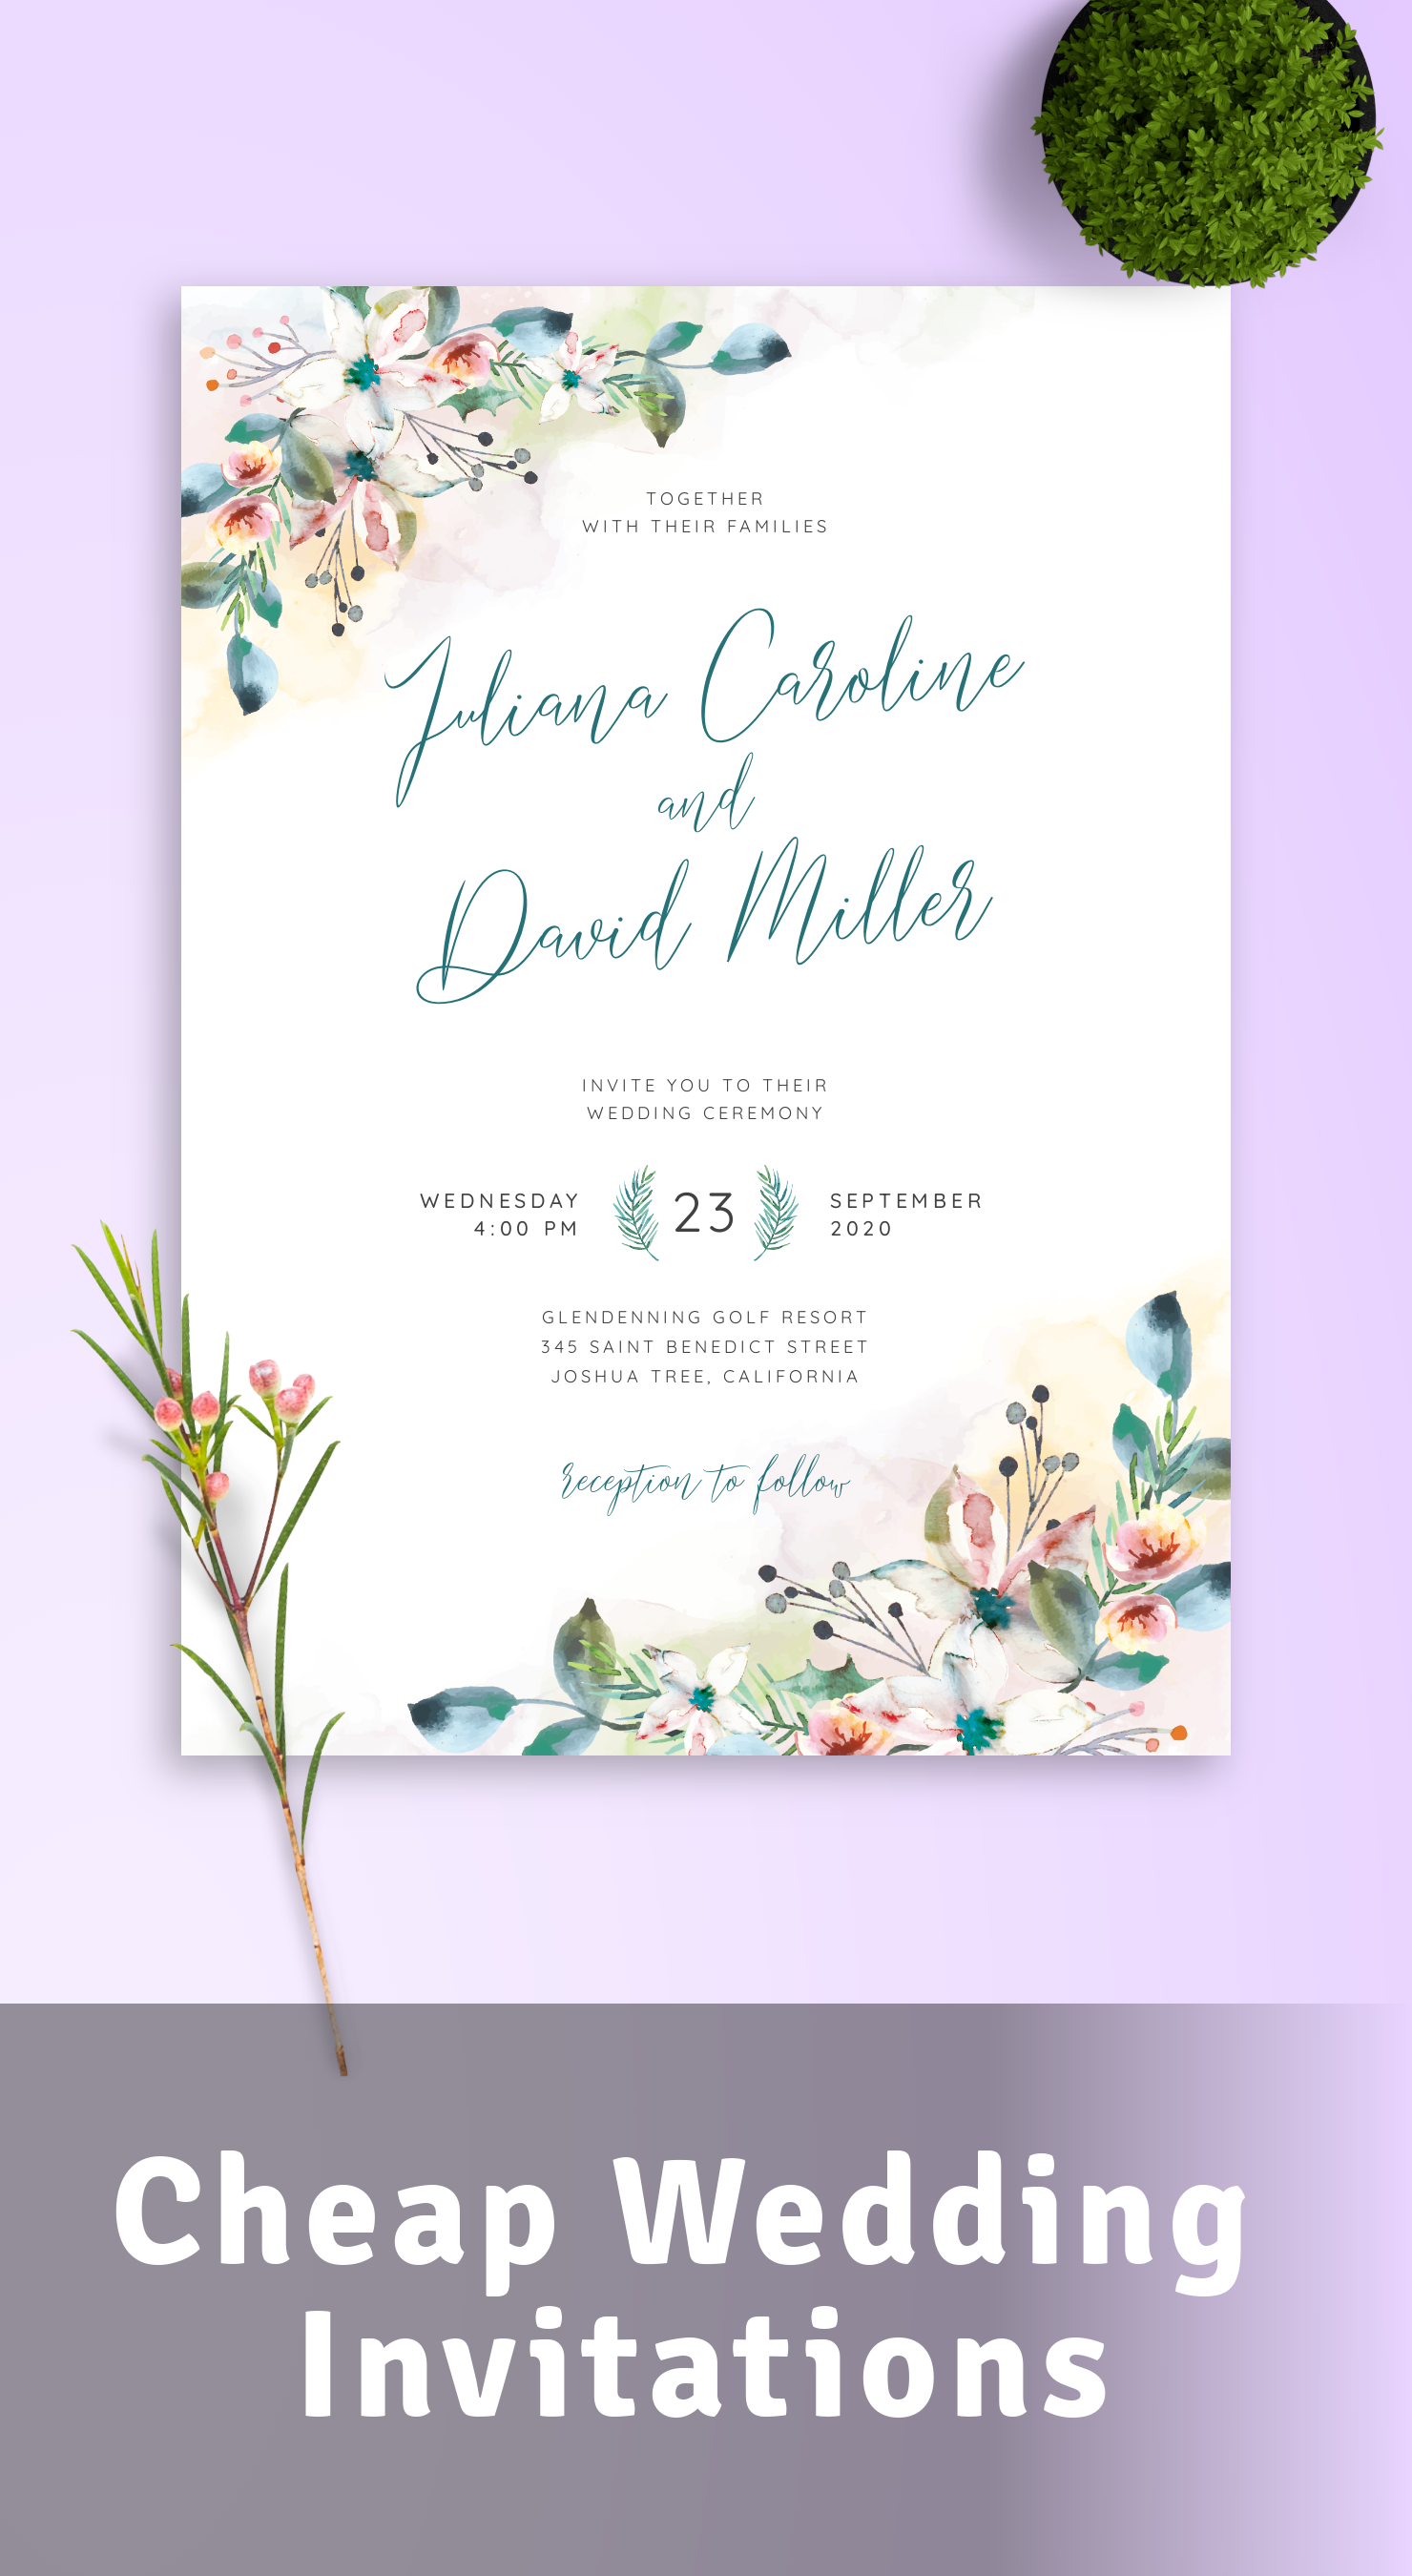 Download or Print Cheap Wedding Invitations